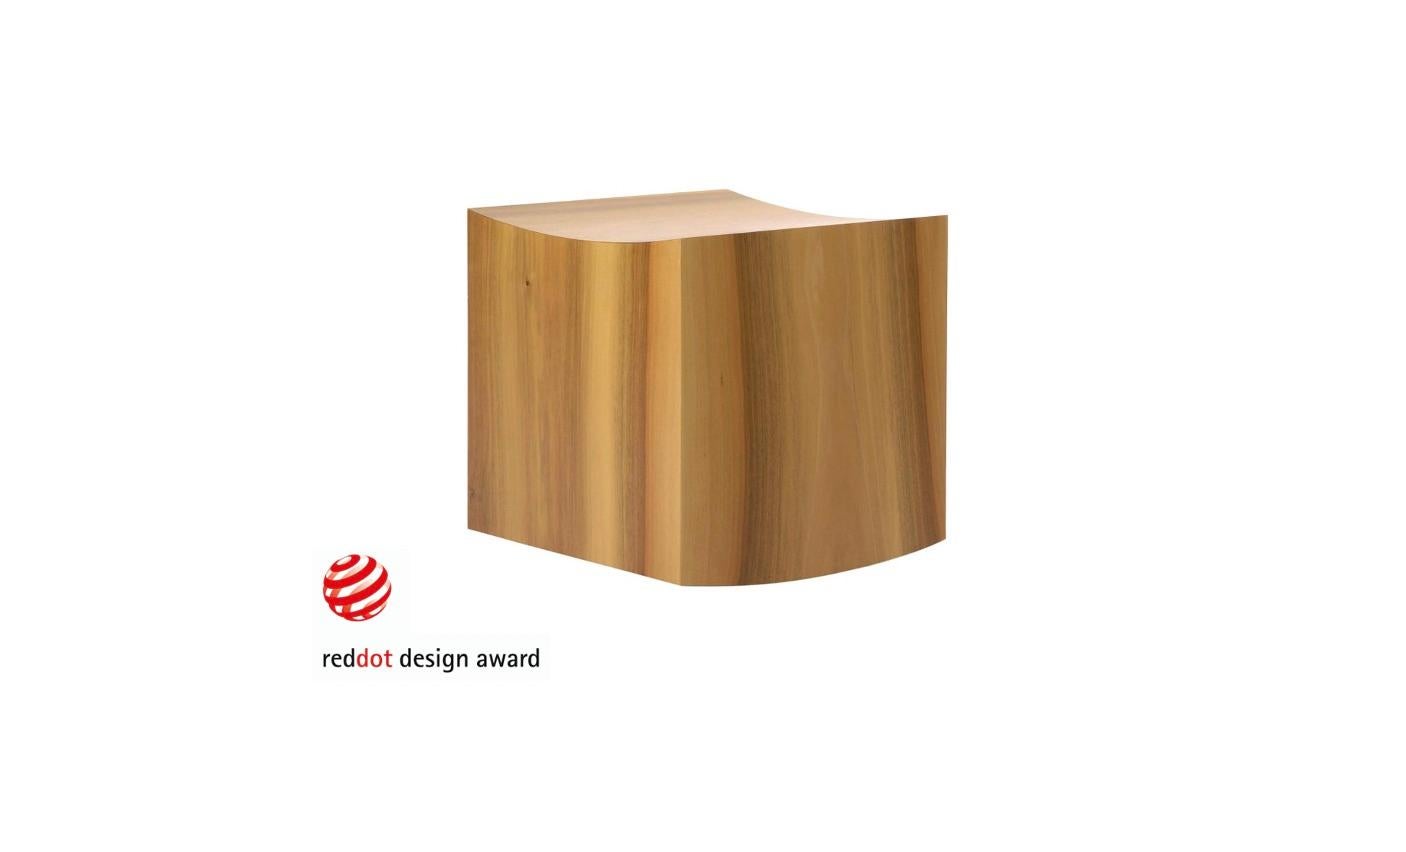 This swiss rocking stool is an icon and an architectural timepiece. 
RED DOT DESIGN WINNER

Monâne is a timeless icon of simplicity and design. Monâne the rocking stool is a playful and intelligent seating that show at its best Swiss